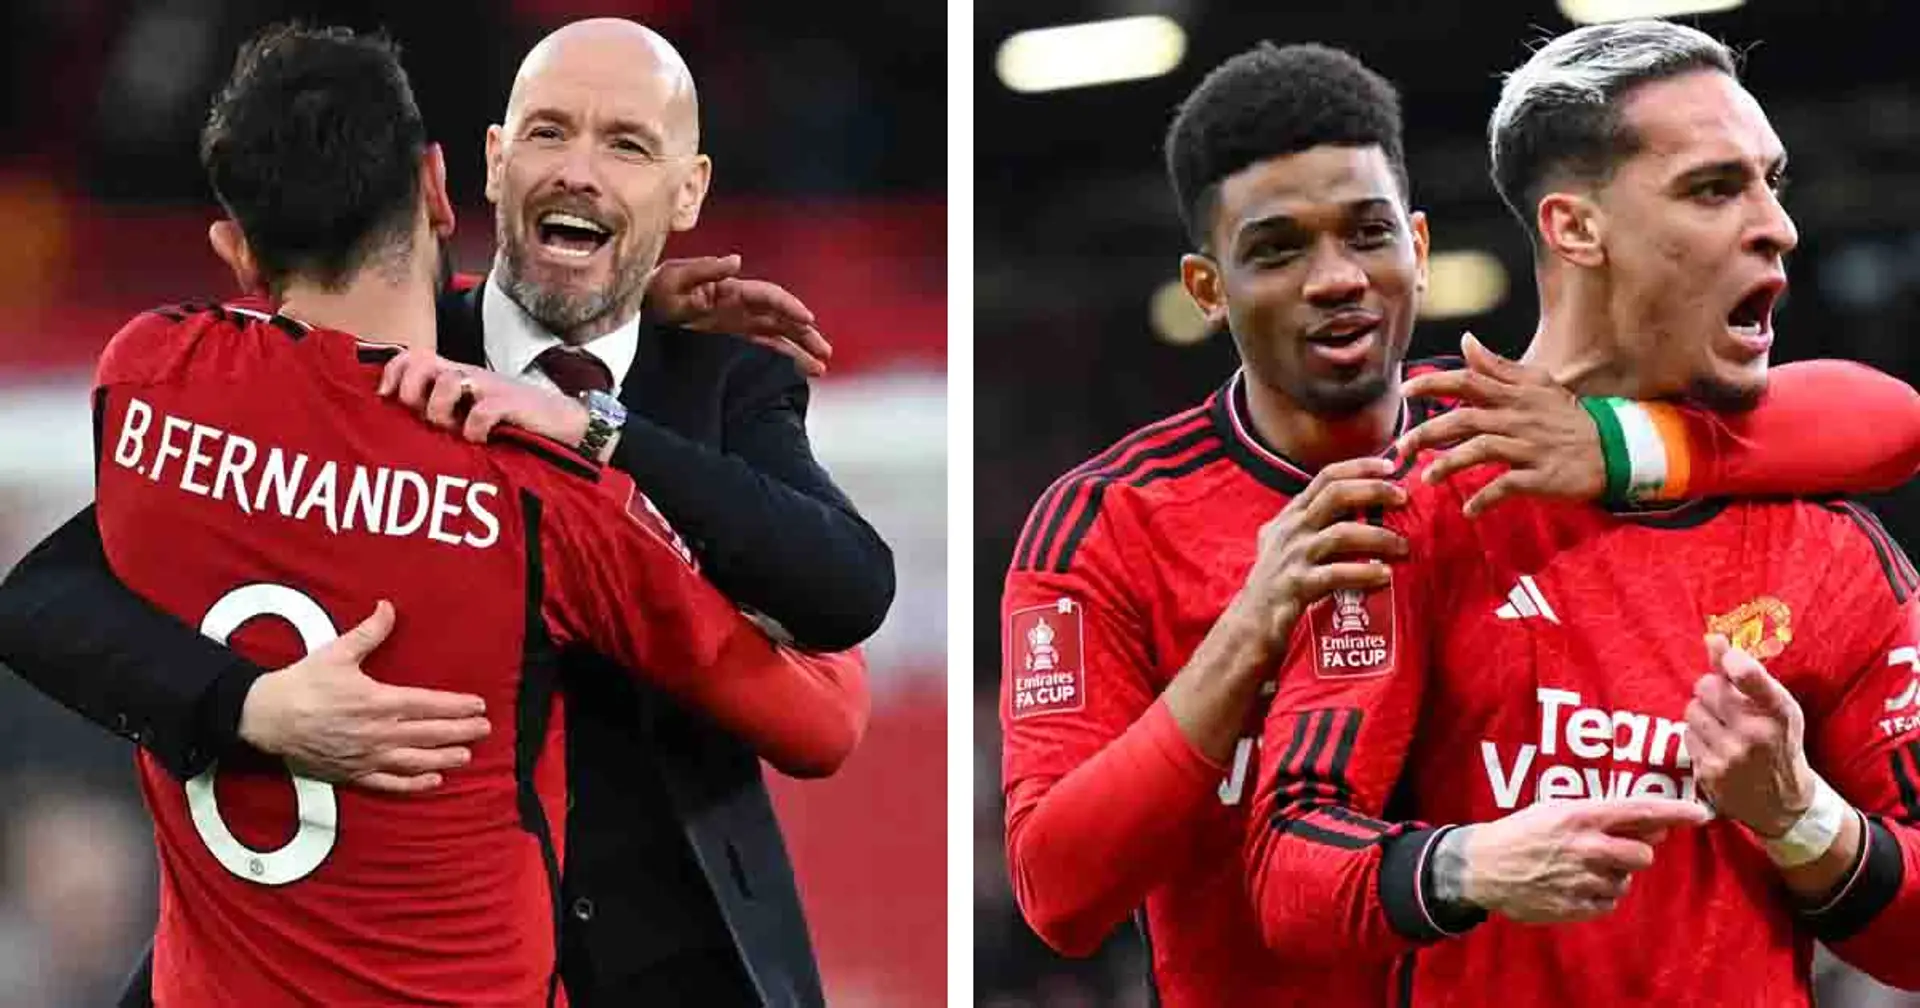 Ten Hag deserves time, Antony's best role: 5 takeaways from Man United's FA Cup win over Liverpool